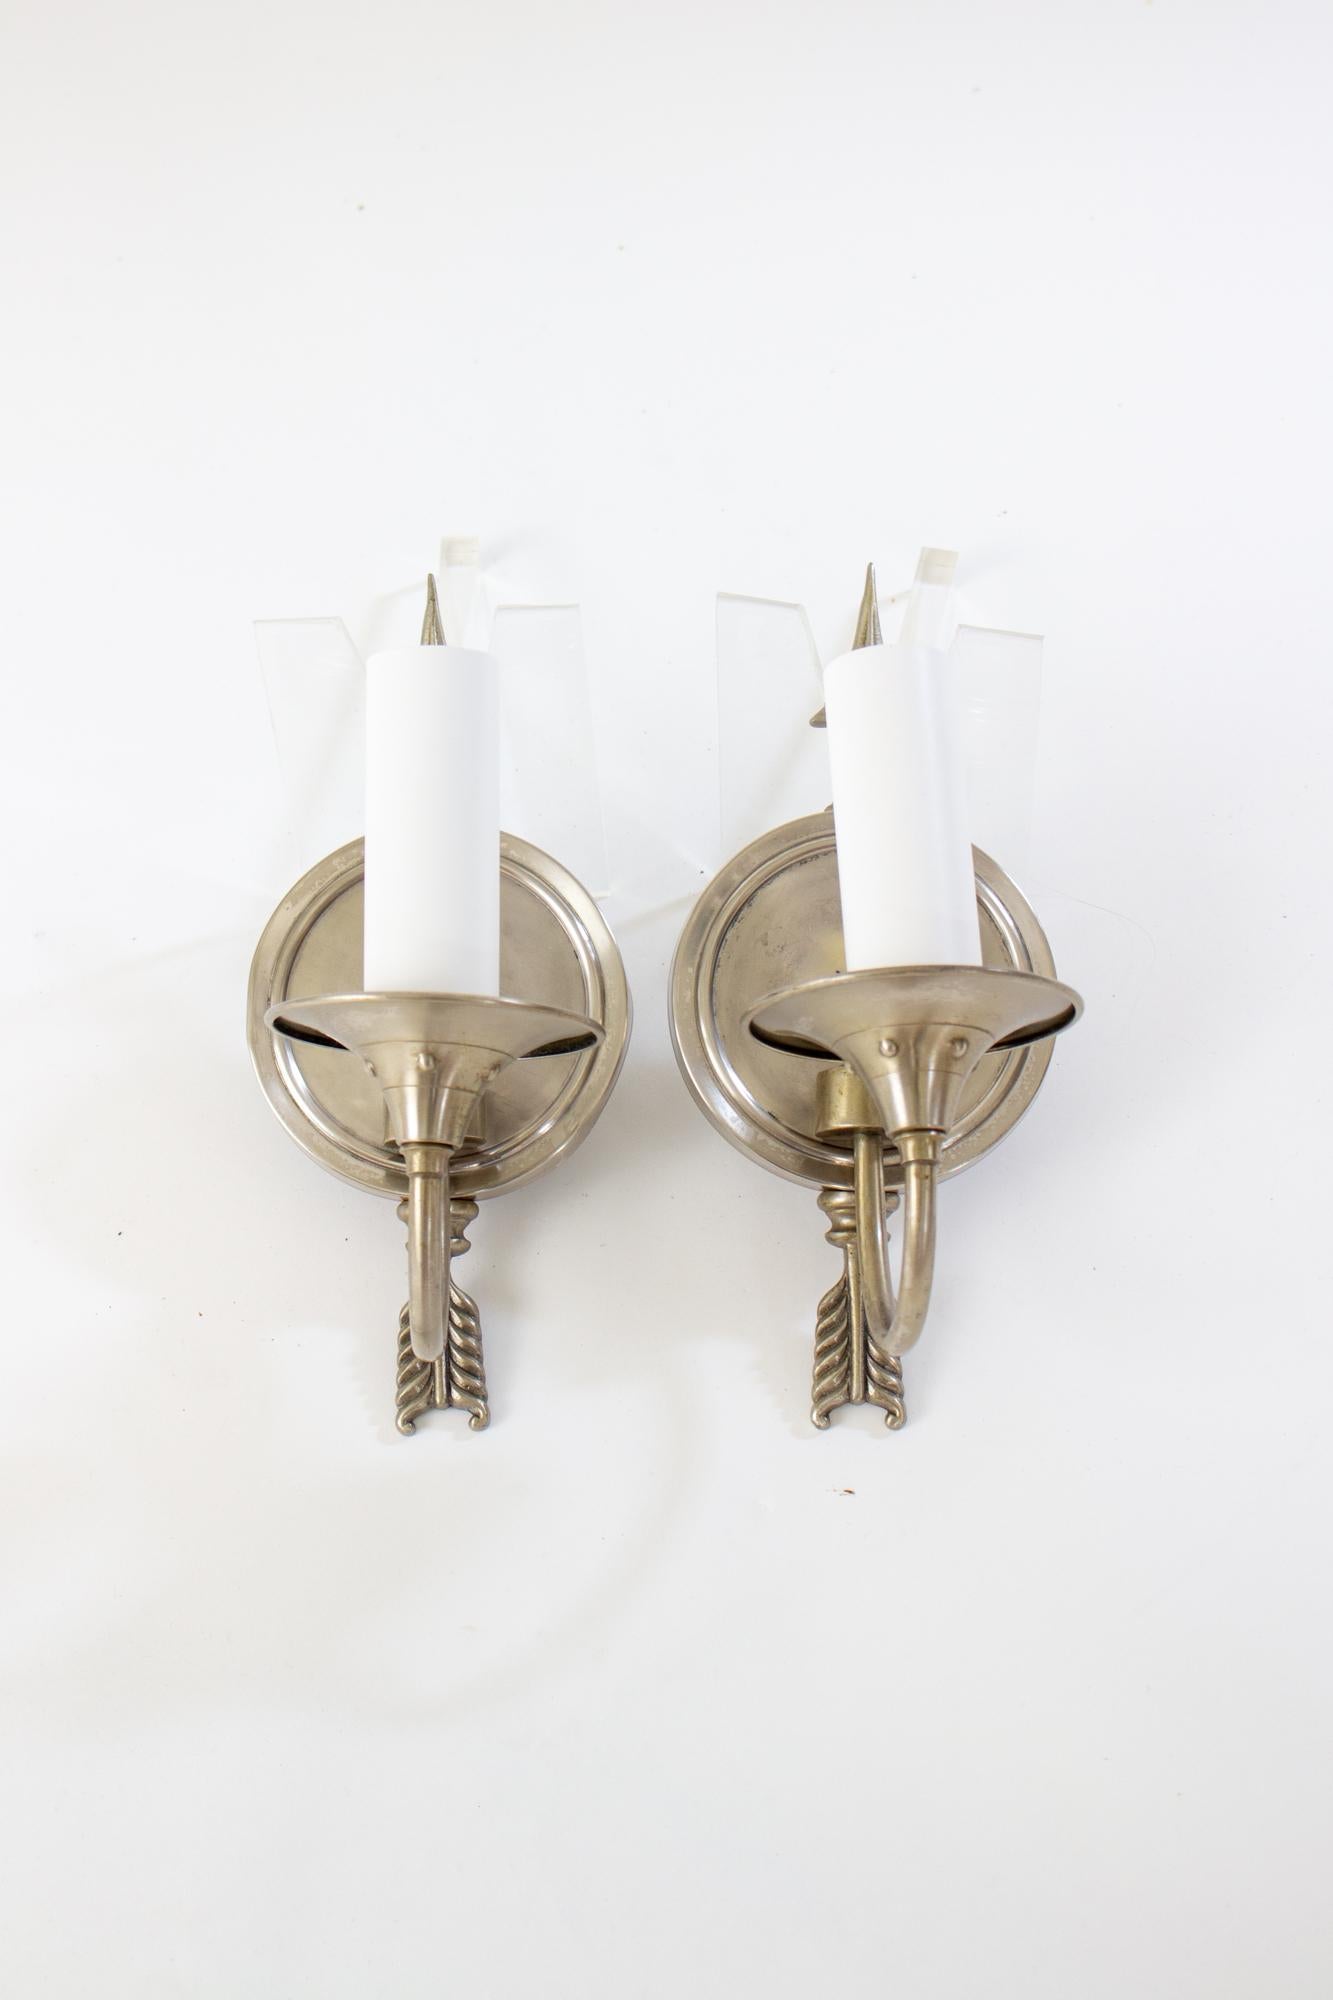 1940’s Levolite nickel arrow sconces with round backplates. Slender arm curves up to a single light. Marked “Levolite After Daylight” Brushed nickel finish in good condition, with some wear shown in center. Rewired, US110-120V hardwired. Ready for